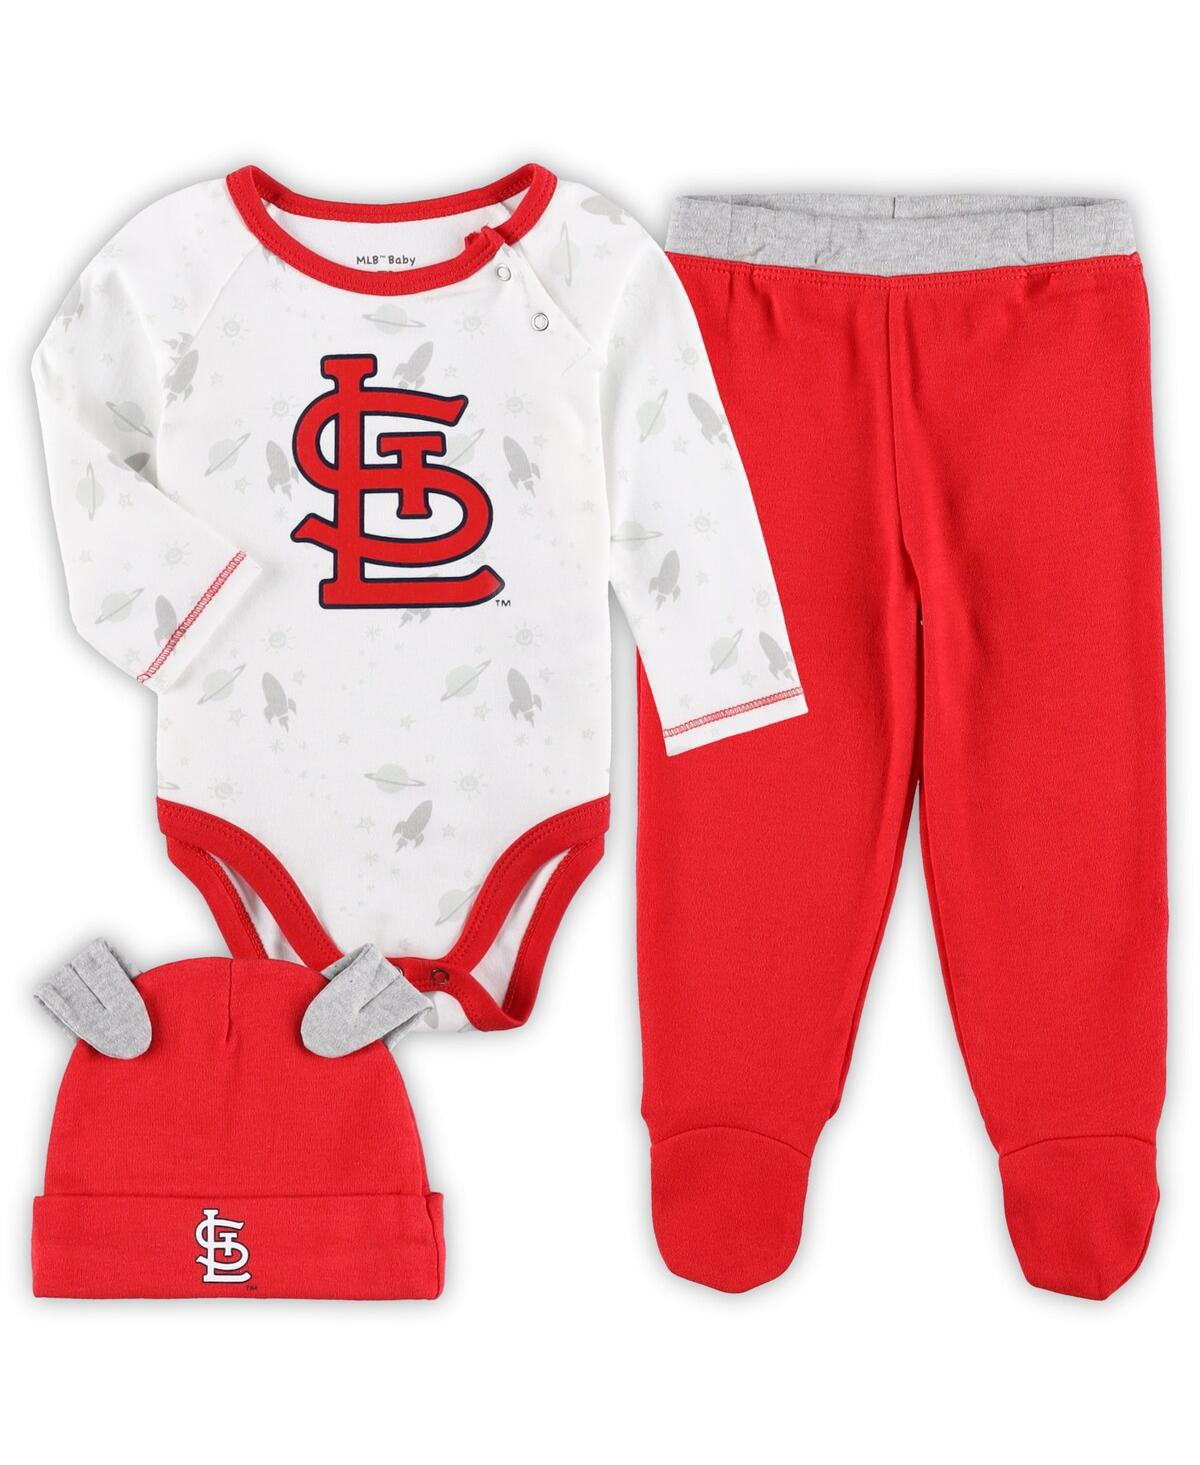 Outerstuff Babies' Newborn And Infant Boys And Girls Red, White St. Louis Cardinals Dream Team Bodysuit Hat And Footed In Red,white